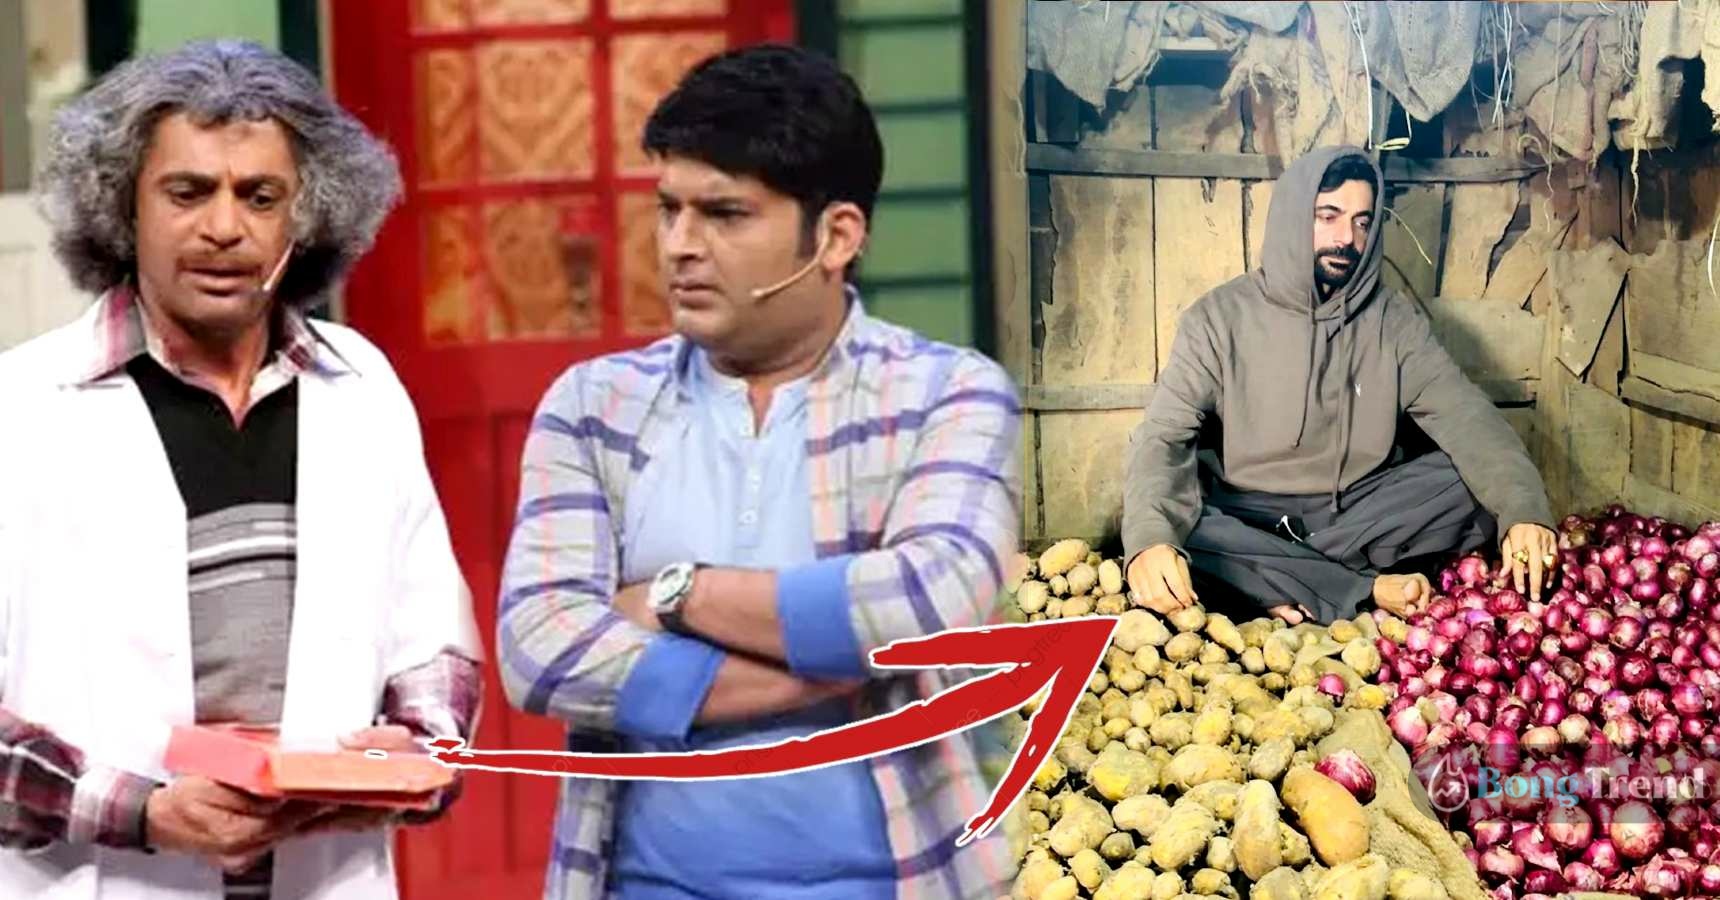 Comedy Nights with Kapil show comedian Sunil Grover Selling Potato Pyaz photo goes viral